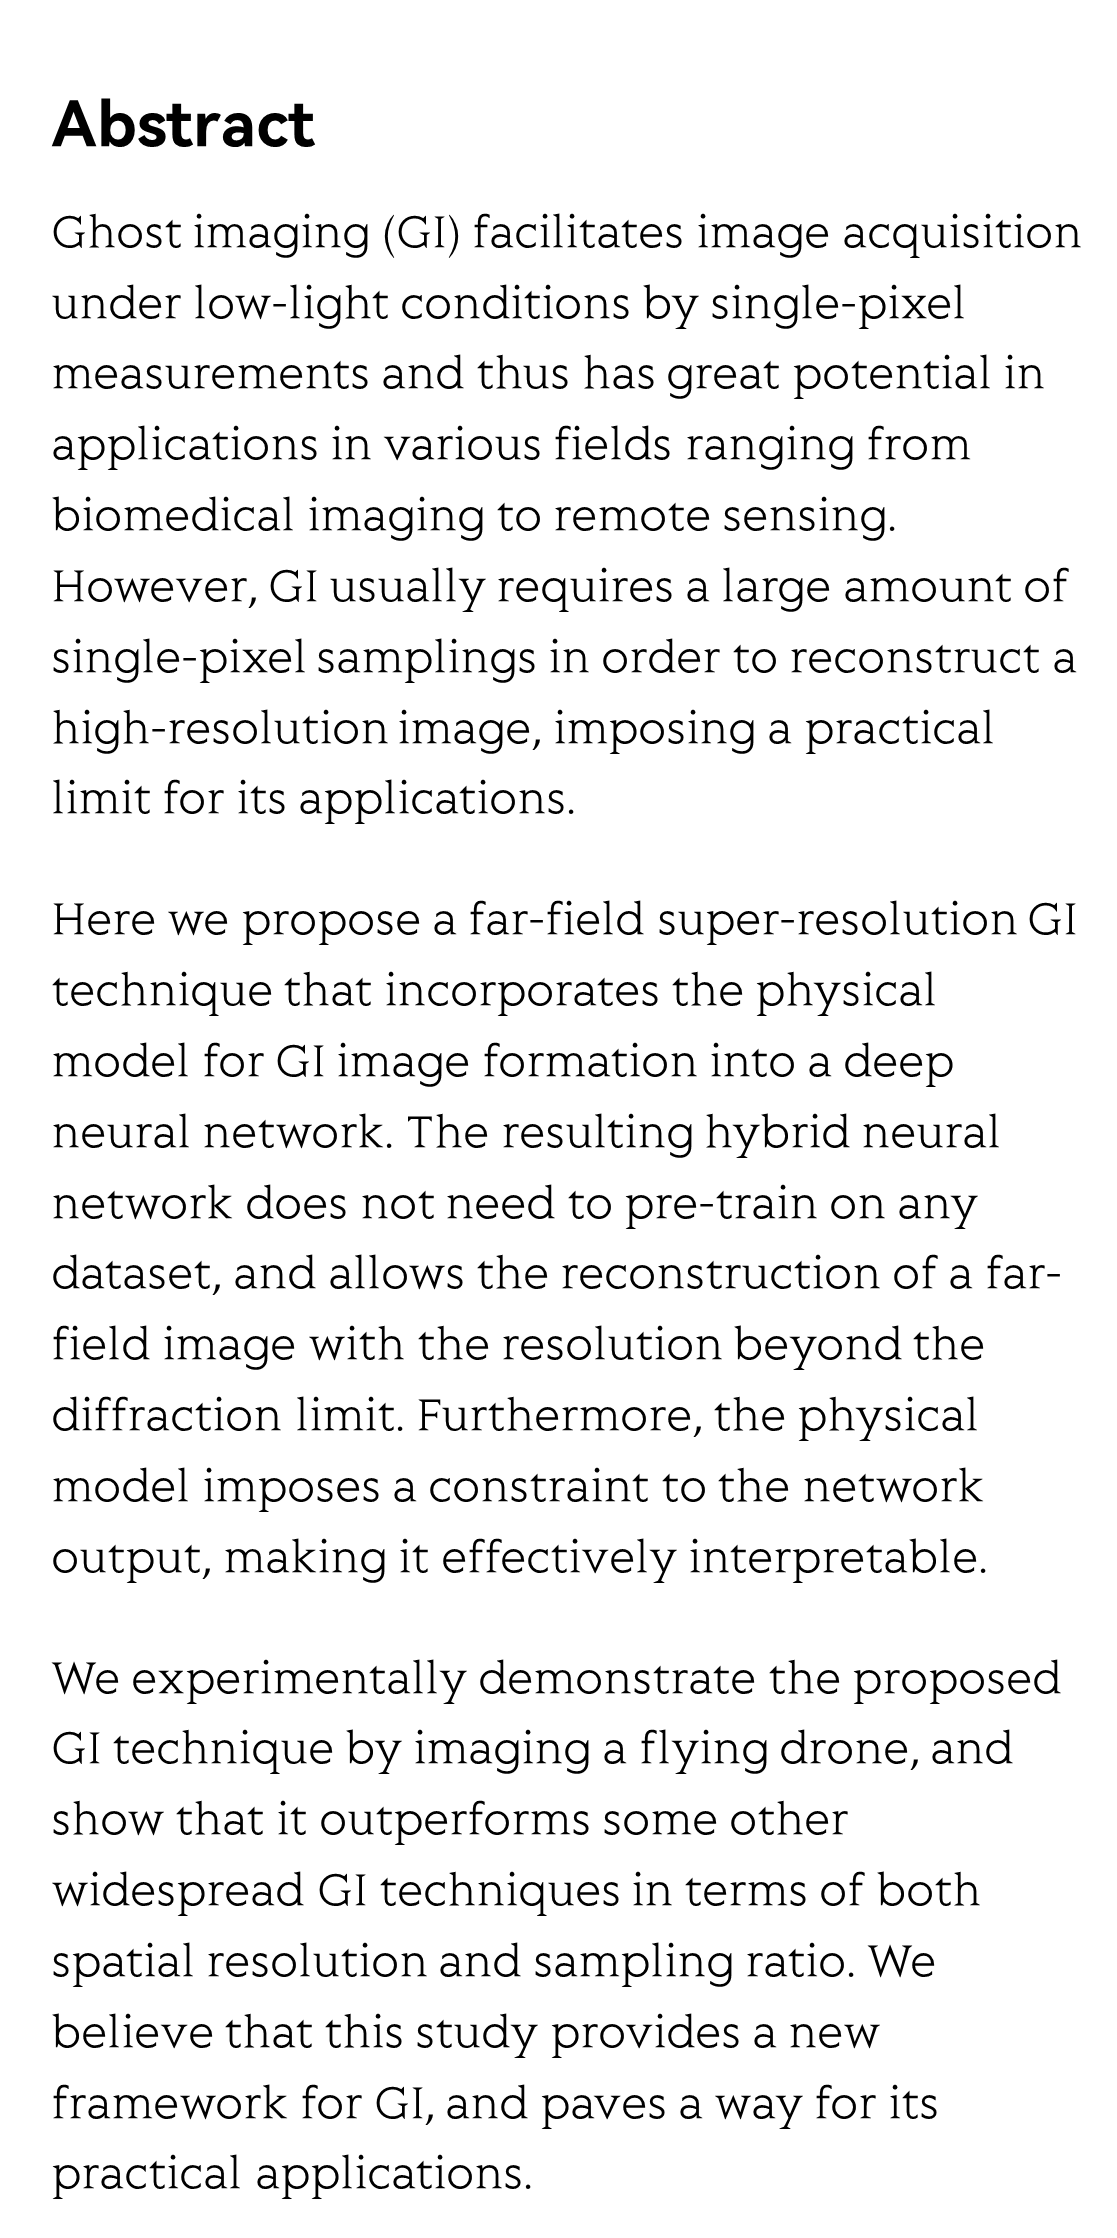 Far-field super-resolution ghost imaging with a deep neural network constraint_2